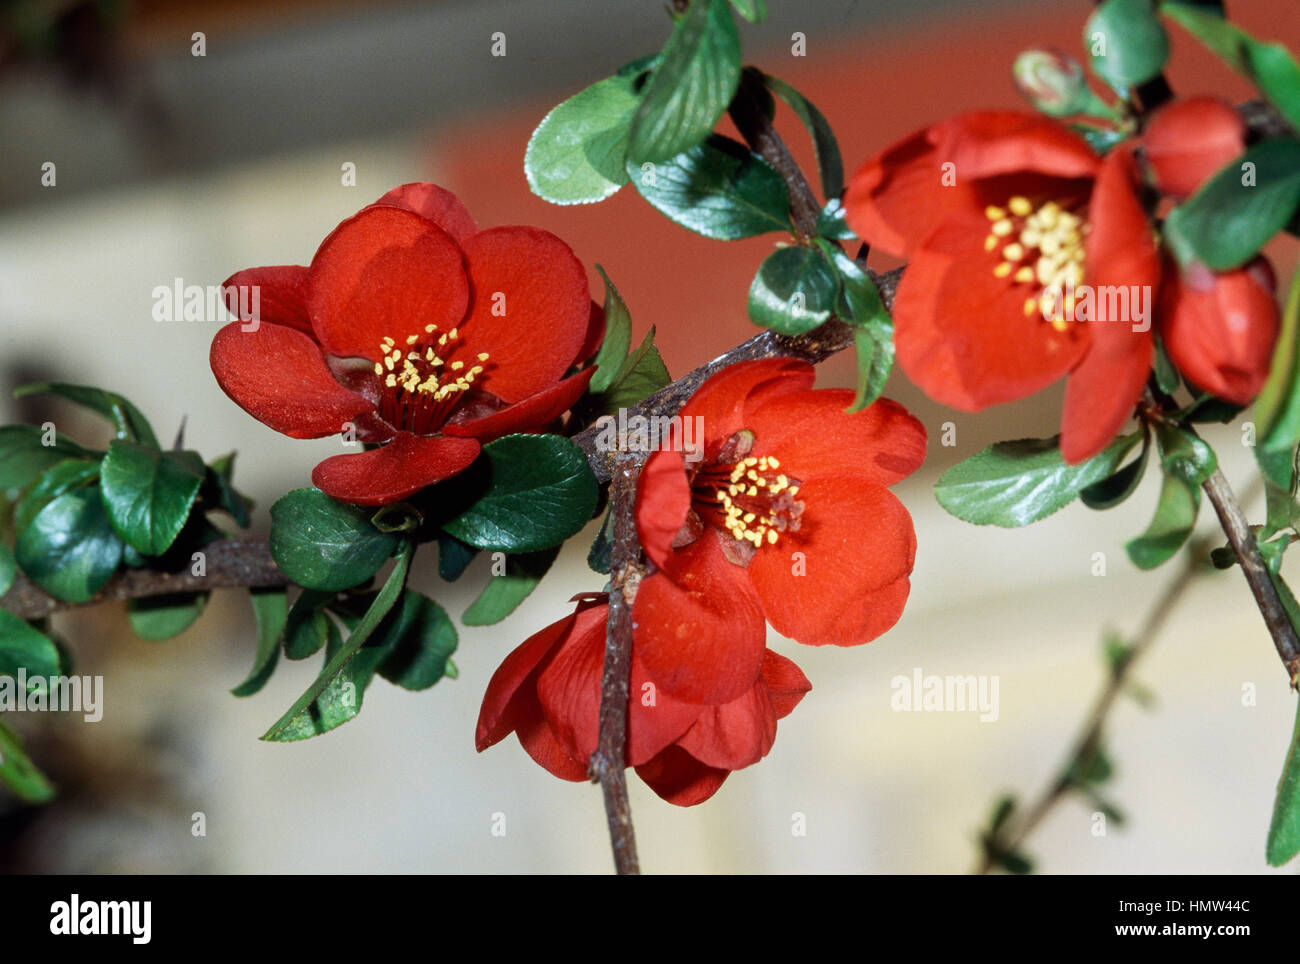 Flowering quince red, Japanese quince white or mugua white (Chaenomeles mugua), Rosaceae. Stock Photo